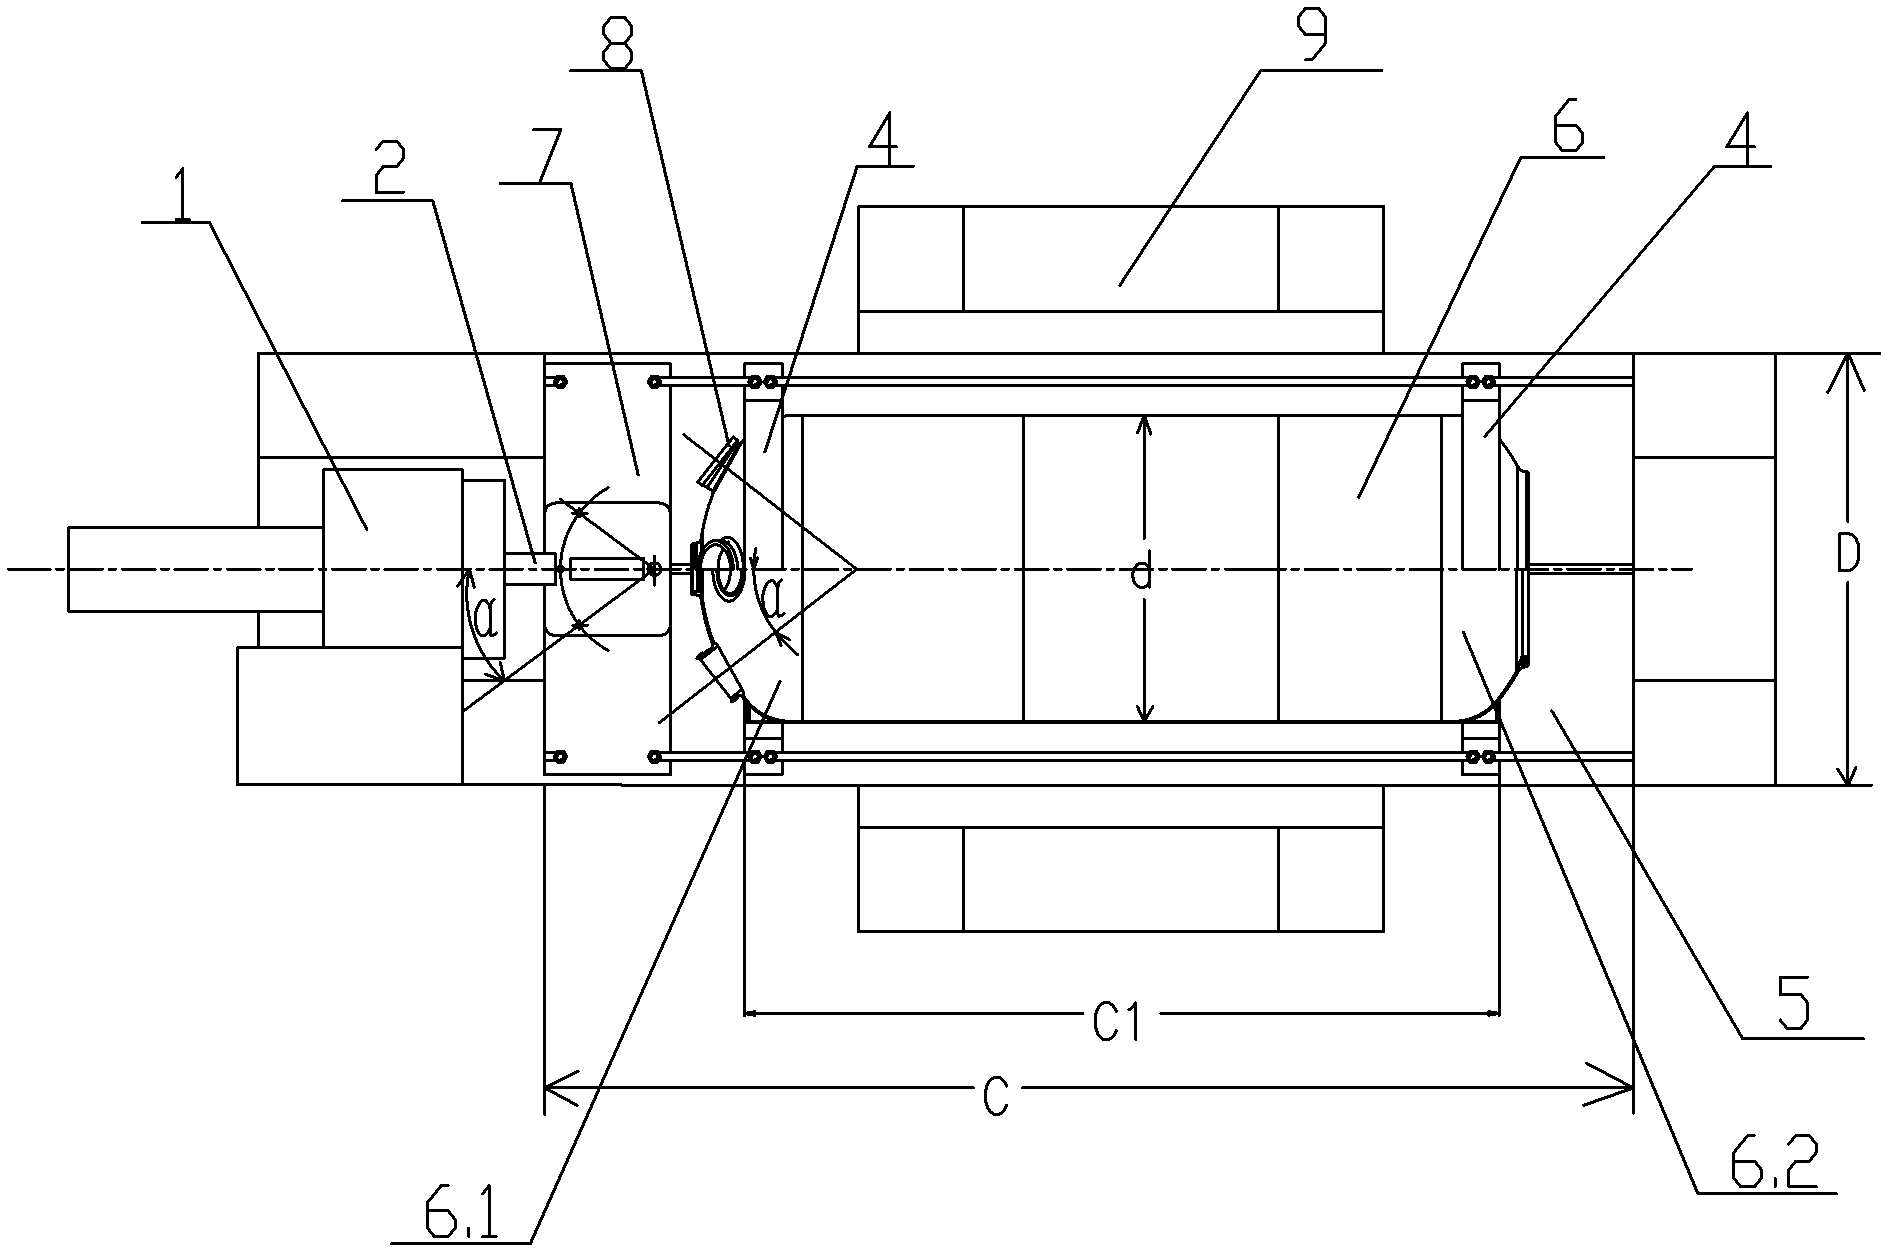 Method for processing back-spraying hole in shell of rocket chamber by using conventional boring machine